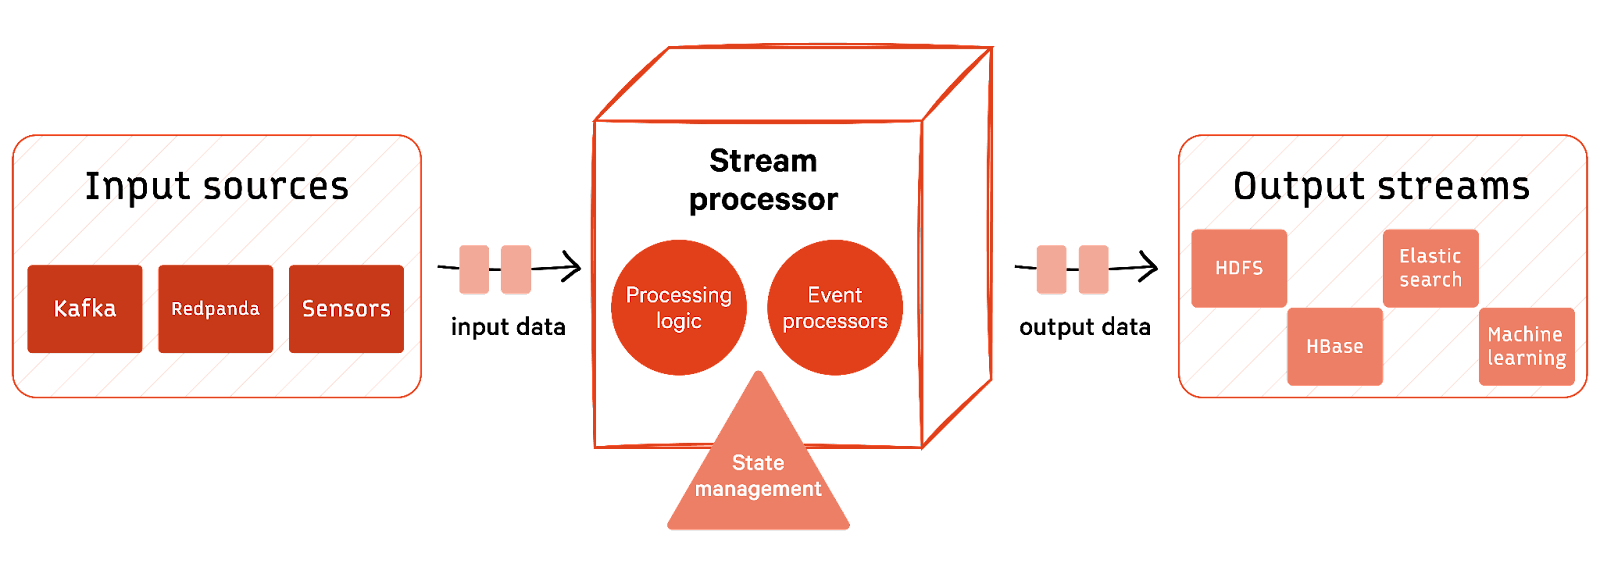 Components of an event-driven architecture